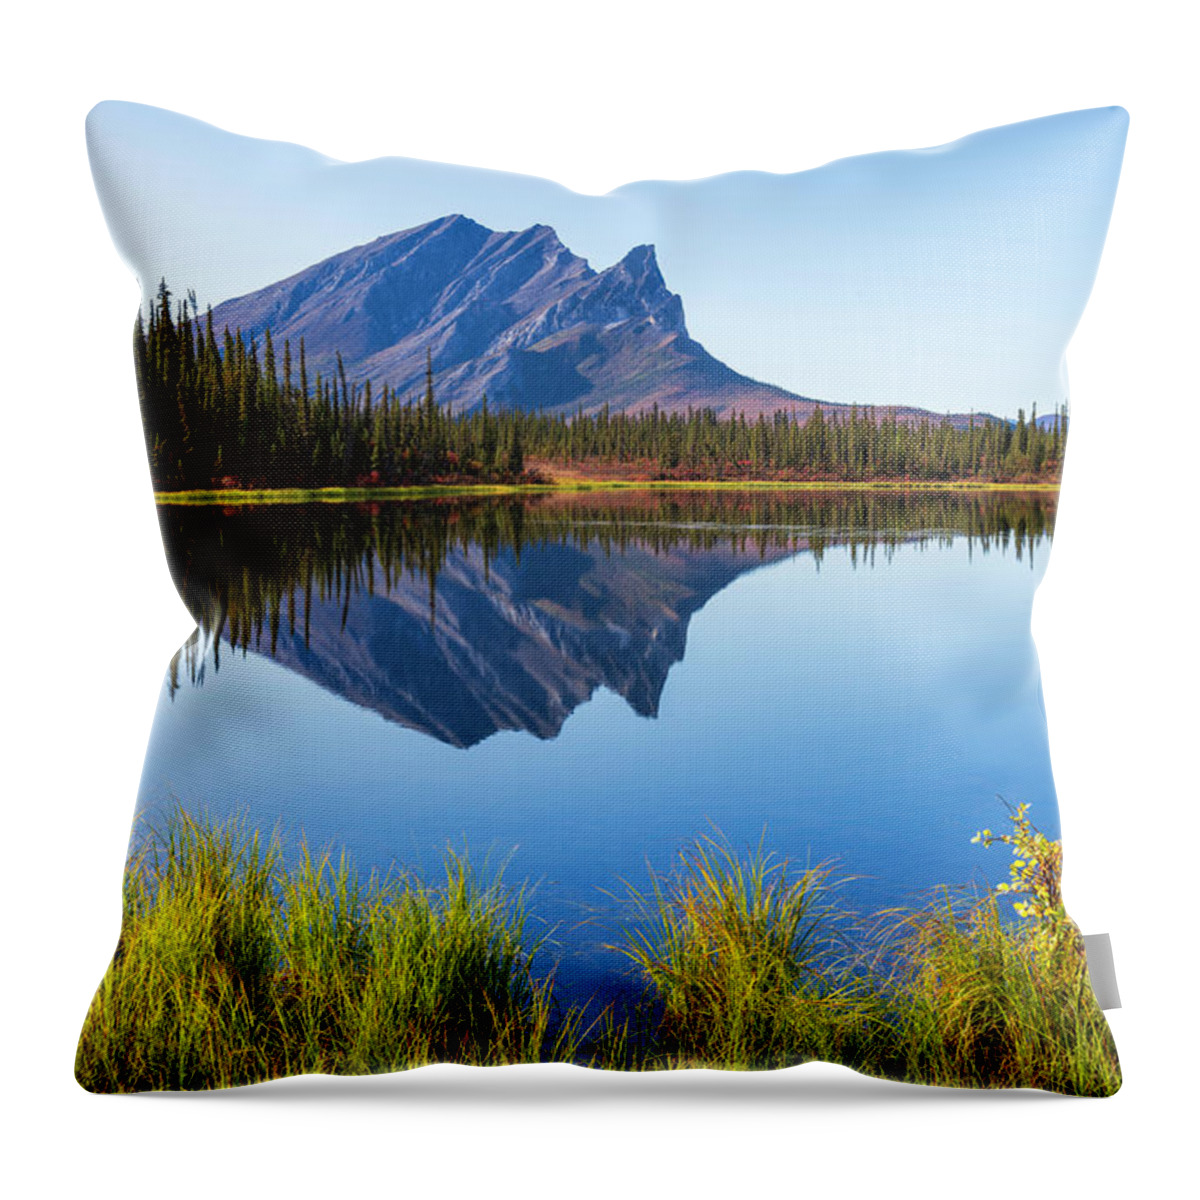 Peaceful Throw Pillow featuring the photograph Peaceful Morning by Chad Dutson